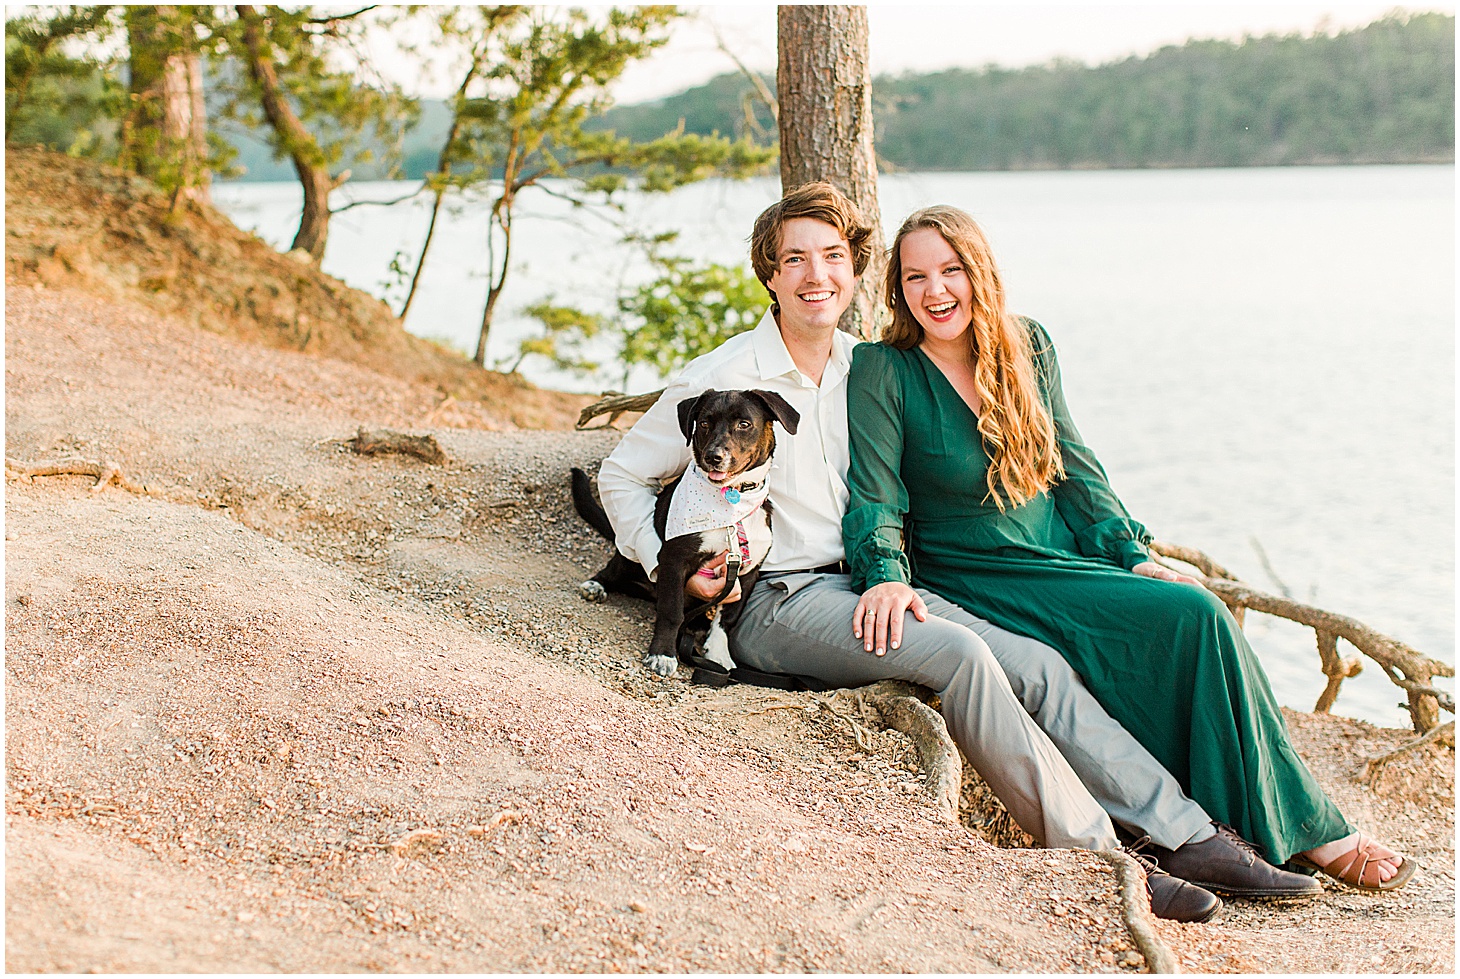 carvinscoveengagementsession_roanokeengagementsession_carvinscove_virginiawedding_virginiaweddingphotographer_vaweddingphotographer_photo_0049.jpg